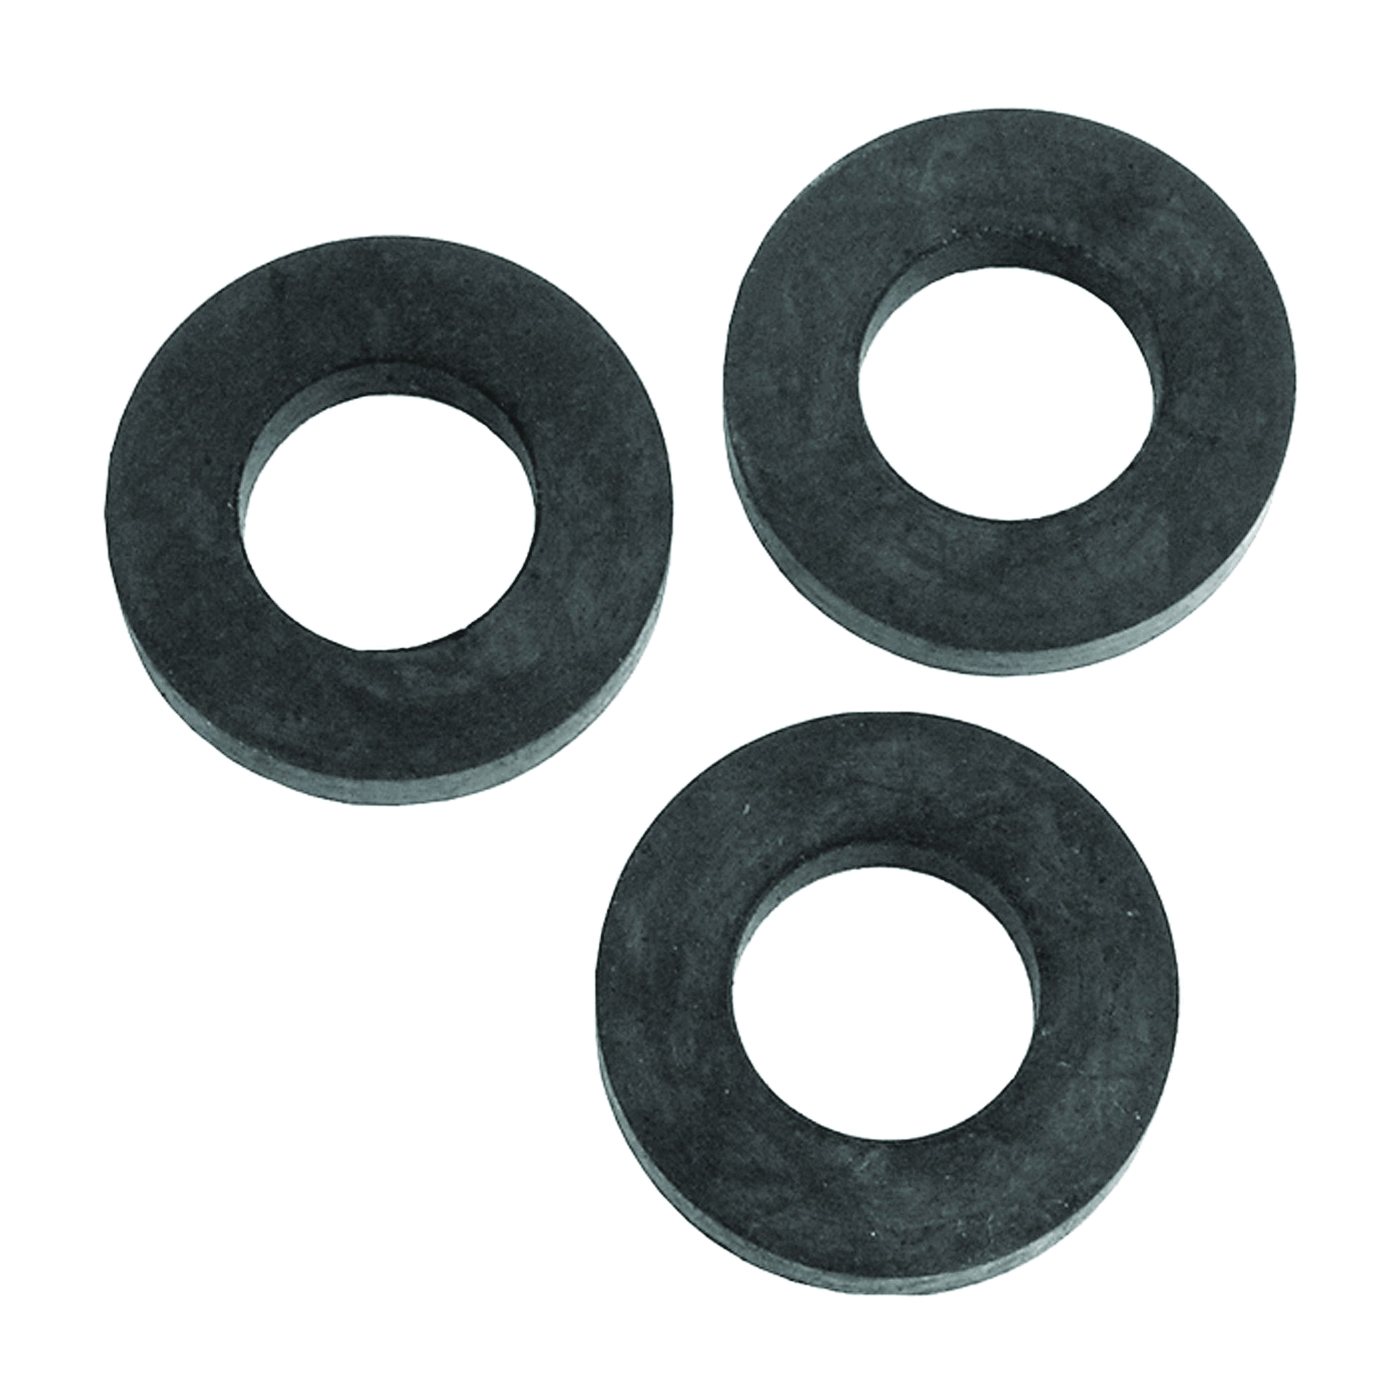 YG00002020 6PK Gasket, Replacement, Black, For: 1/4 in Turn Winged Bayonet Caps